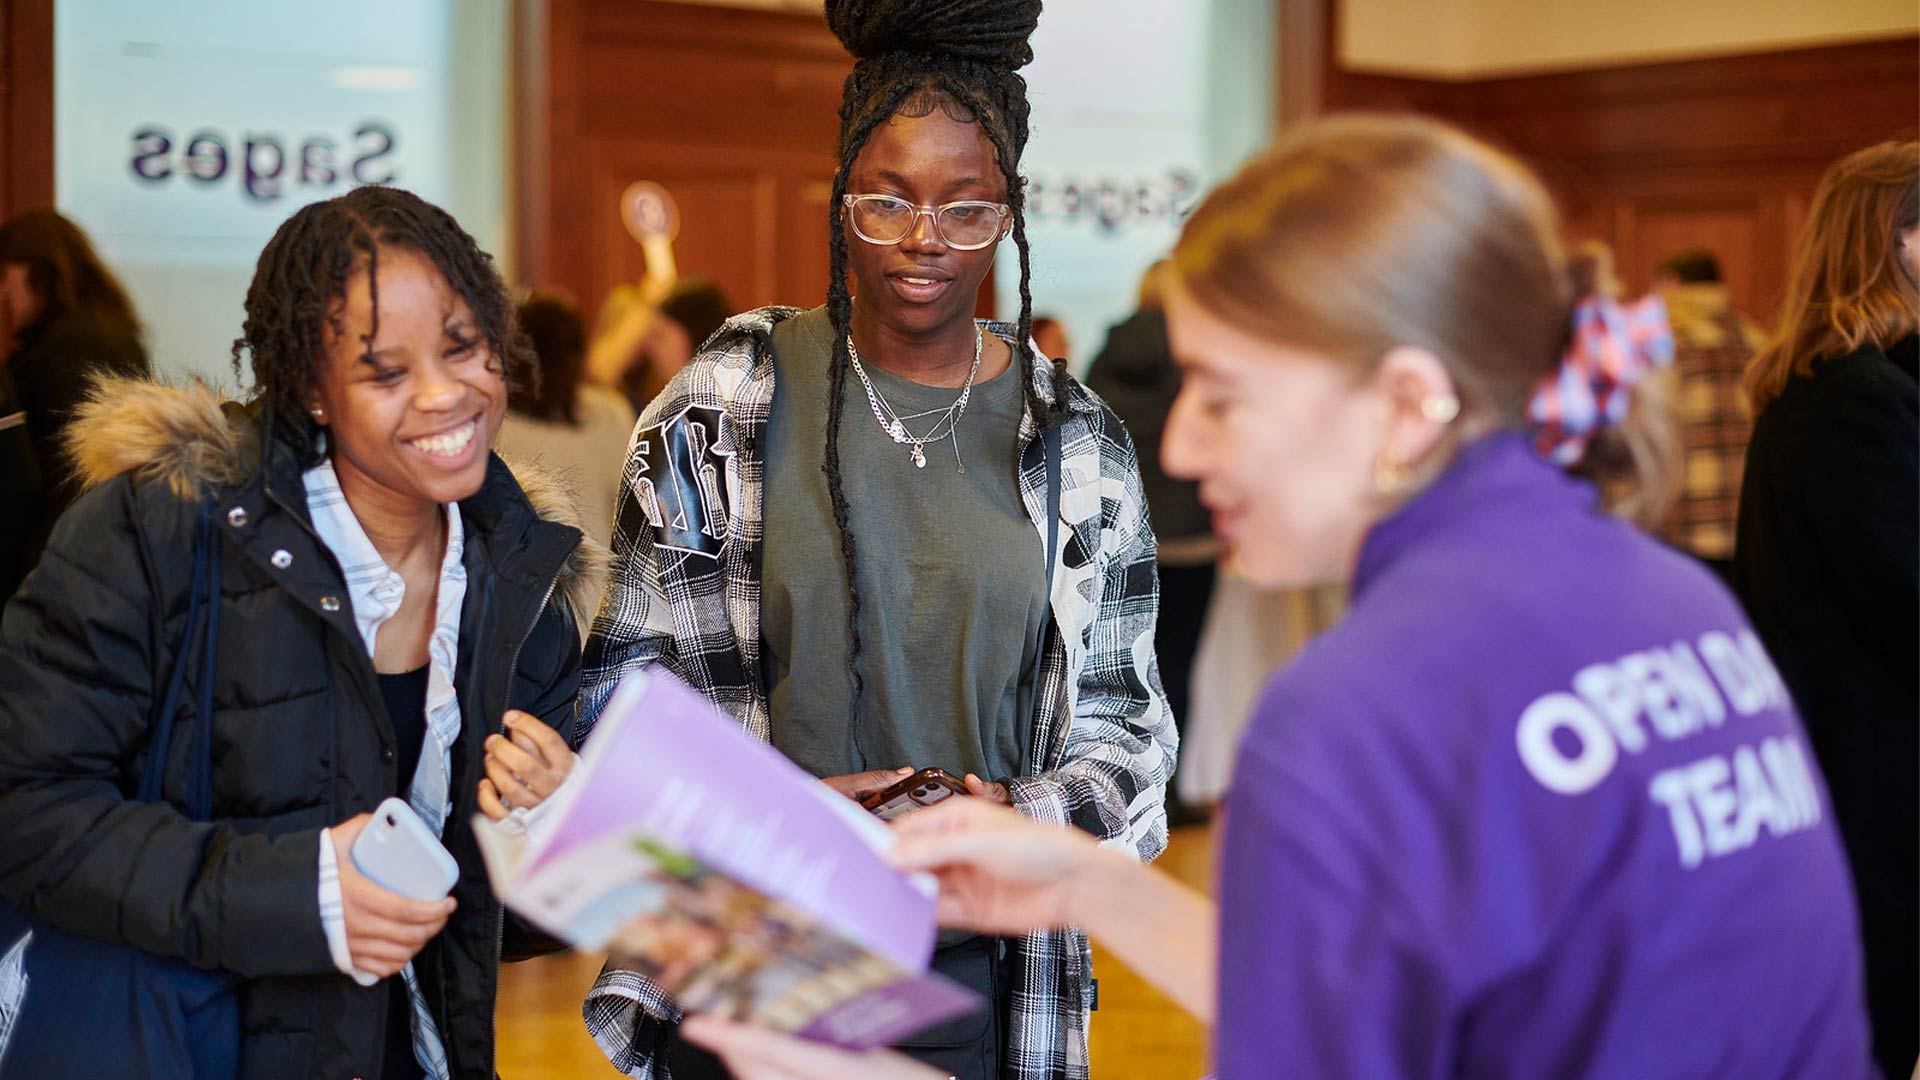 A member of staff helping prospective students at an open day.